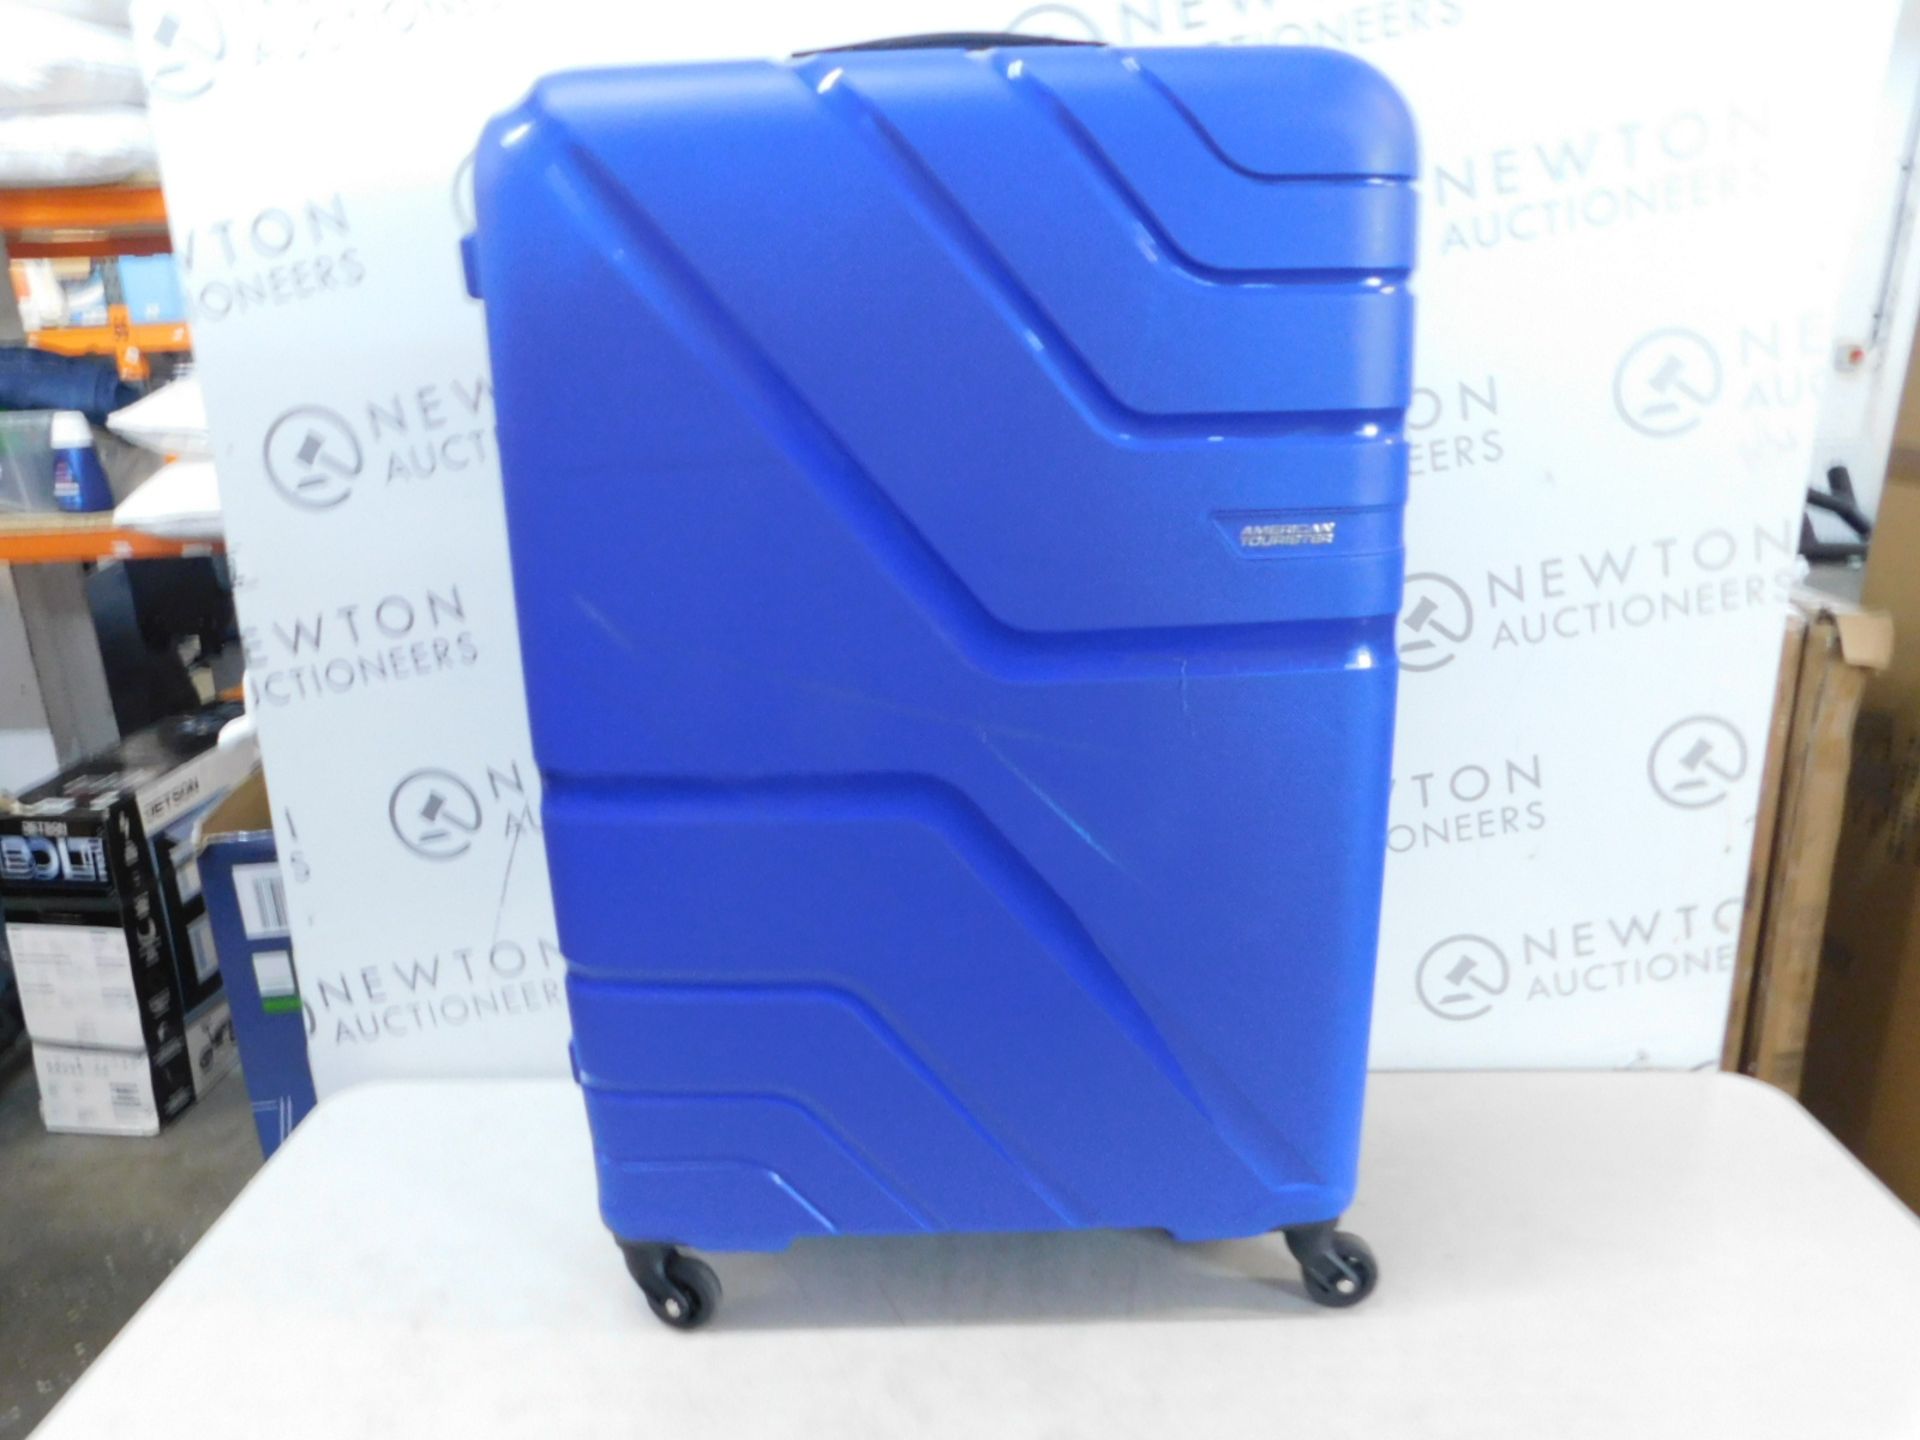 1 AMERICAN TOURISTER HARD CASE BLUE LARGE LUGGAGE CASE RRP Â£79.99